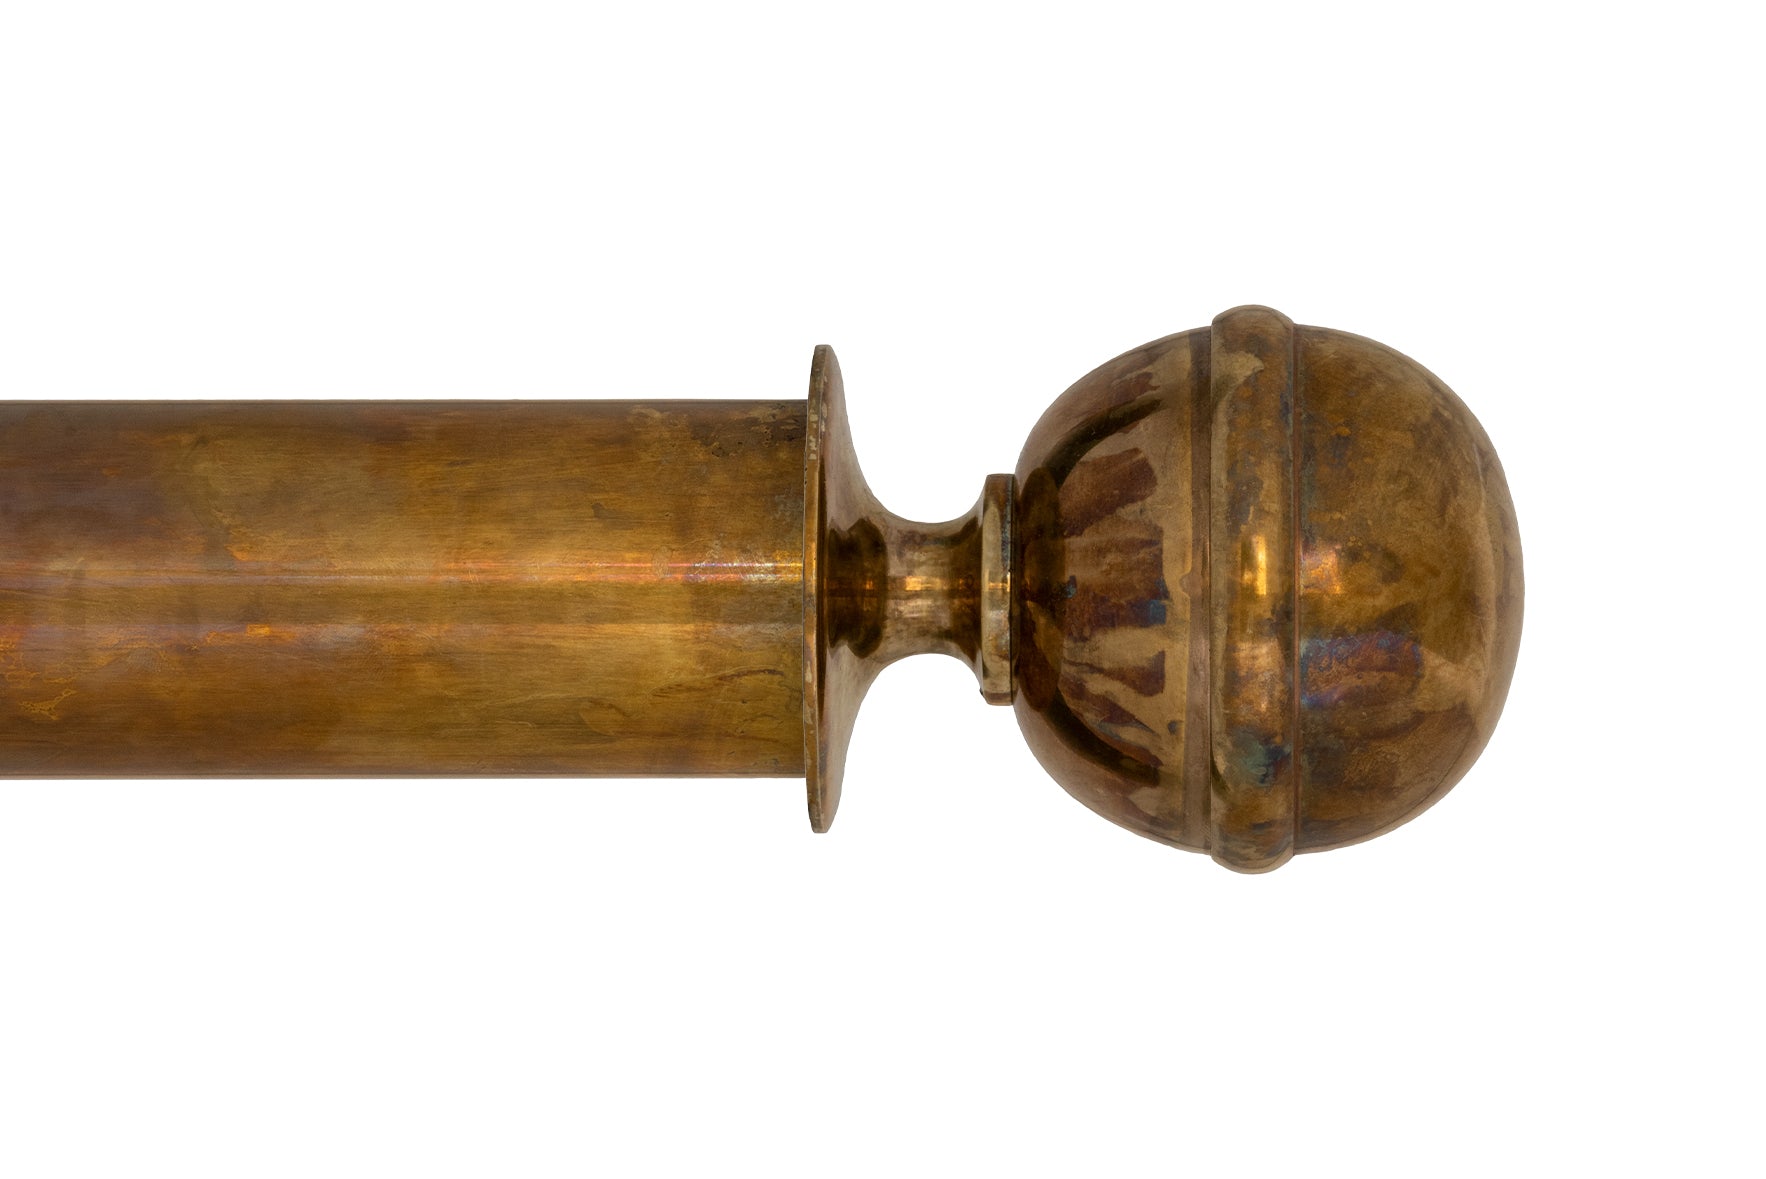 Tillys Classic One Rib Ball Finial Curtain Pole Set in Old Brass